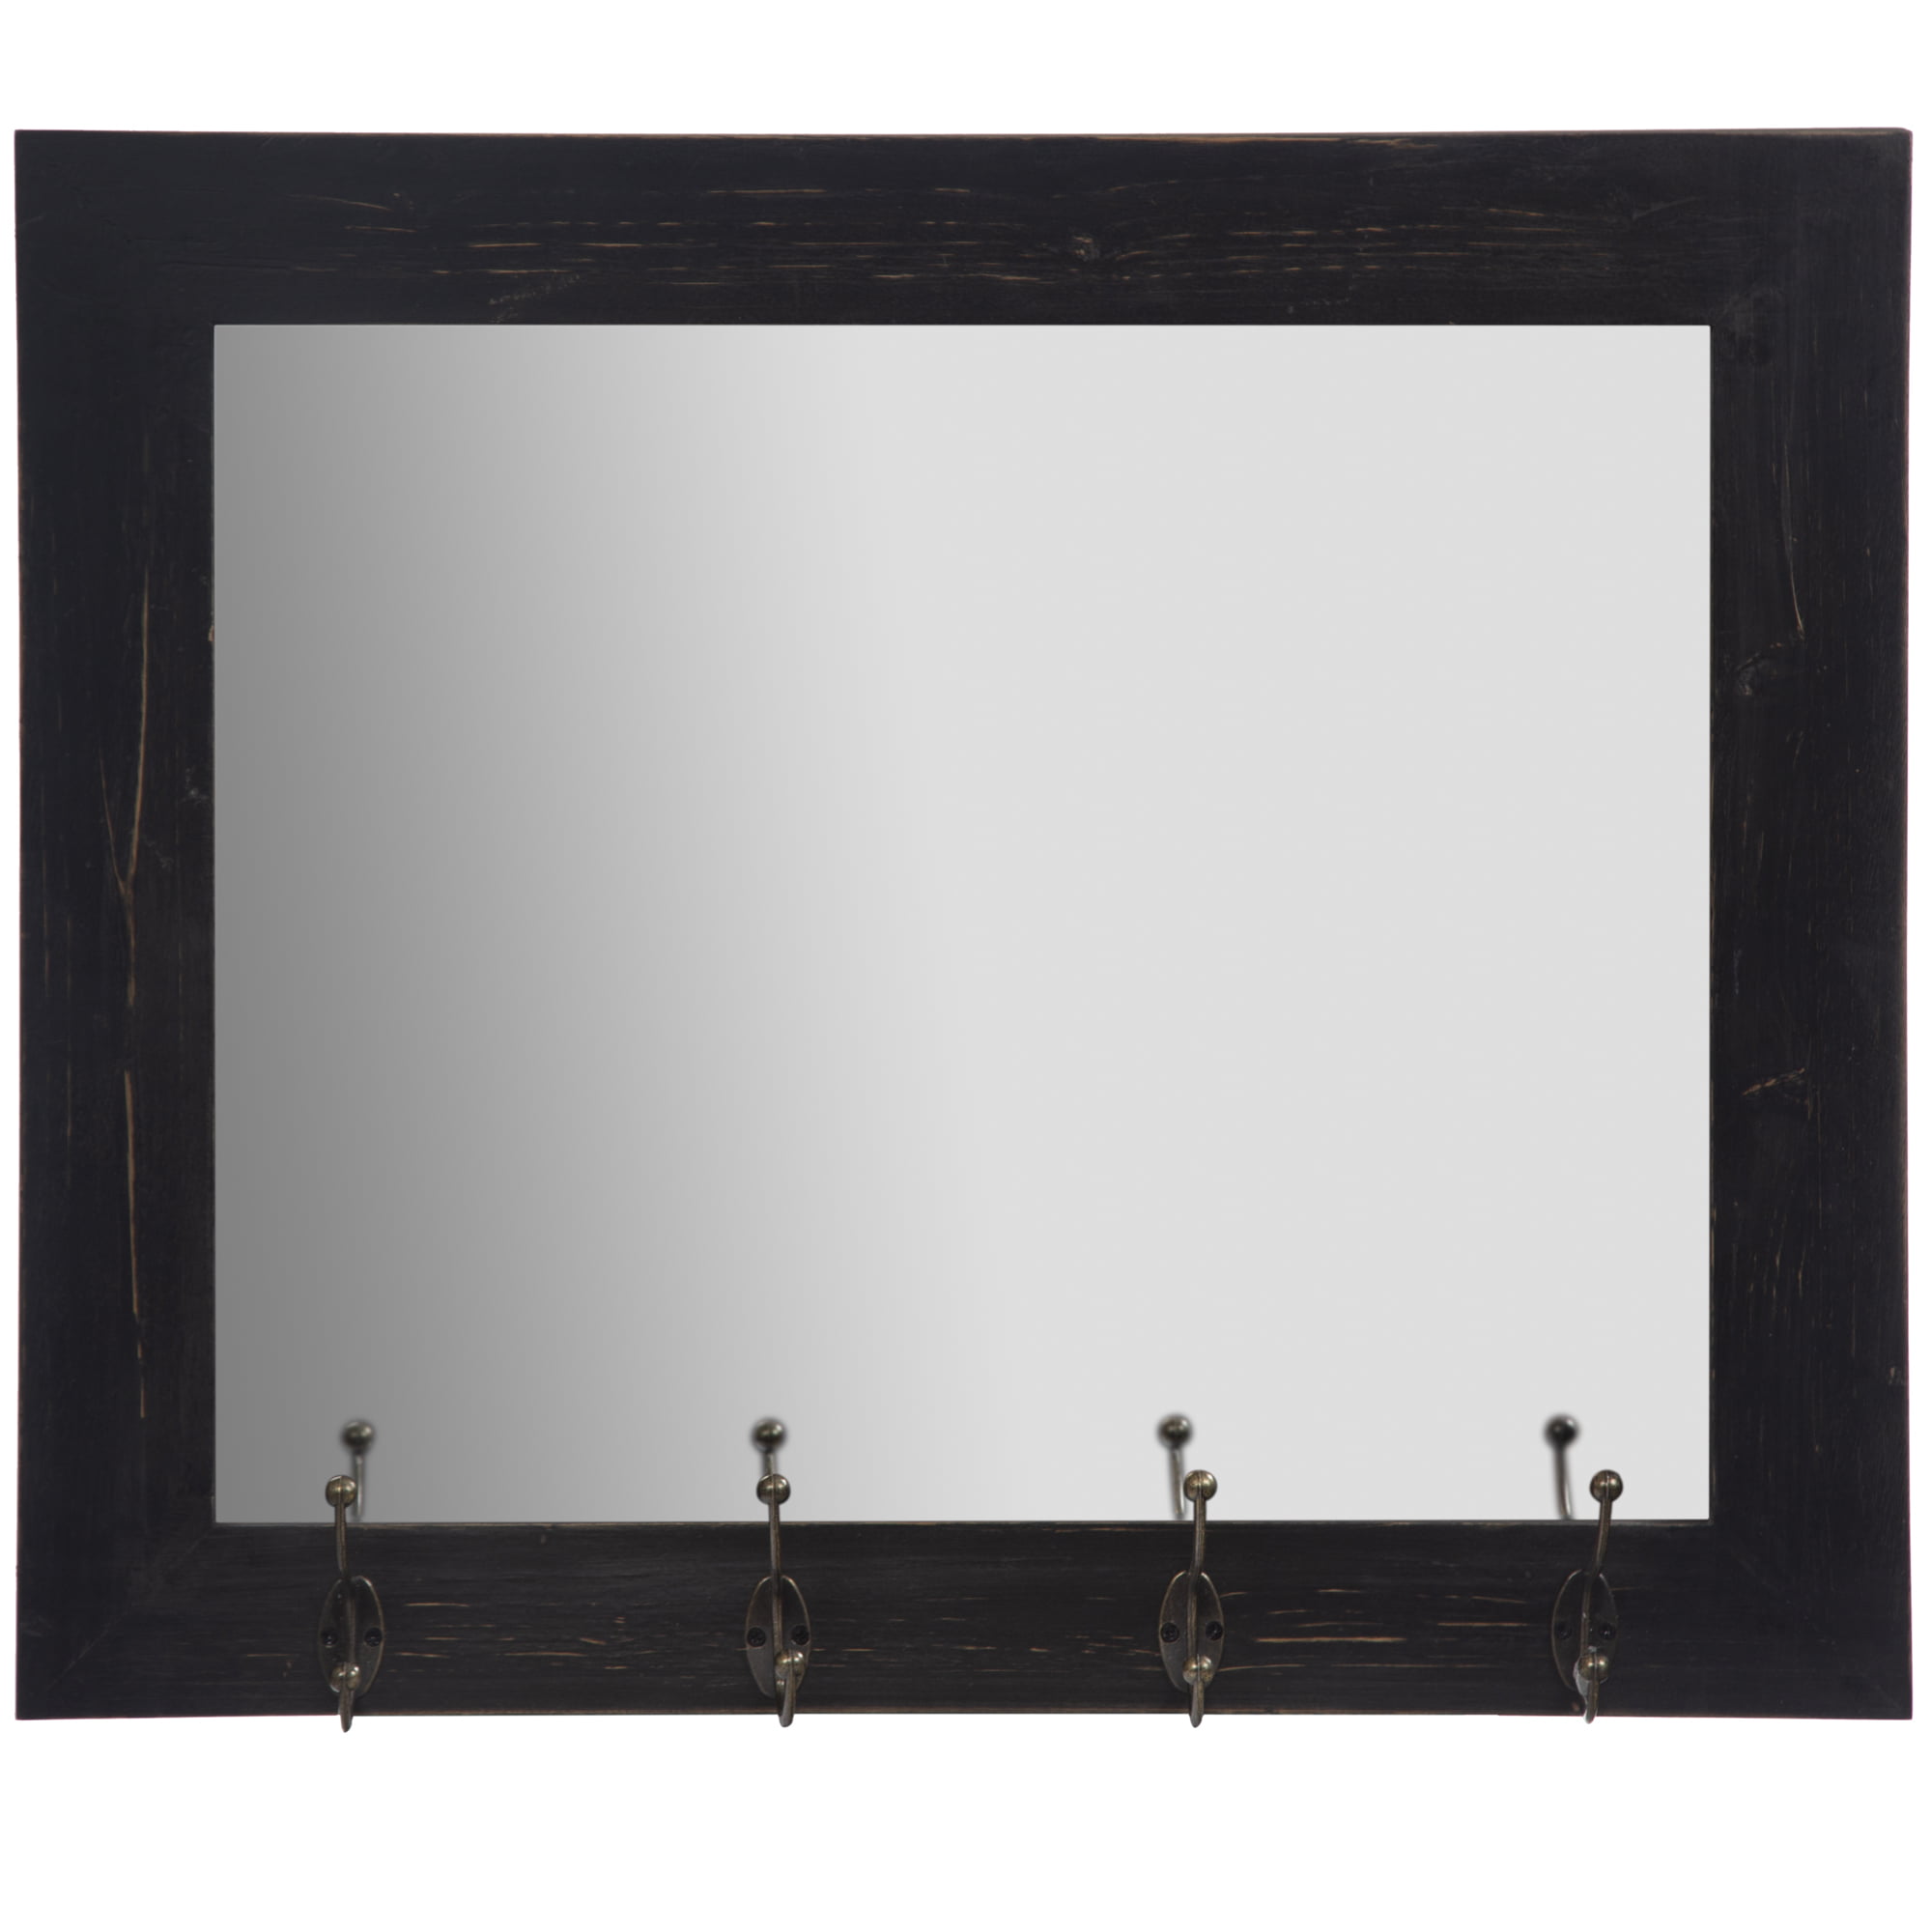 Graywash Wood Plank Square Wall Accent Mirror